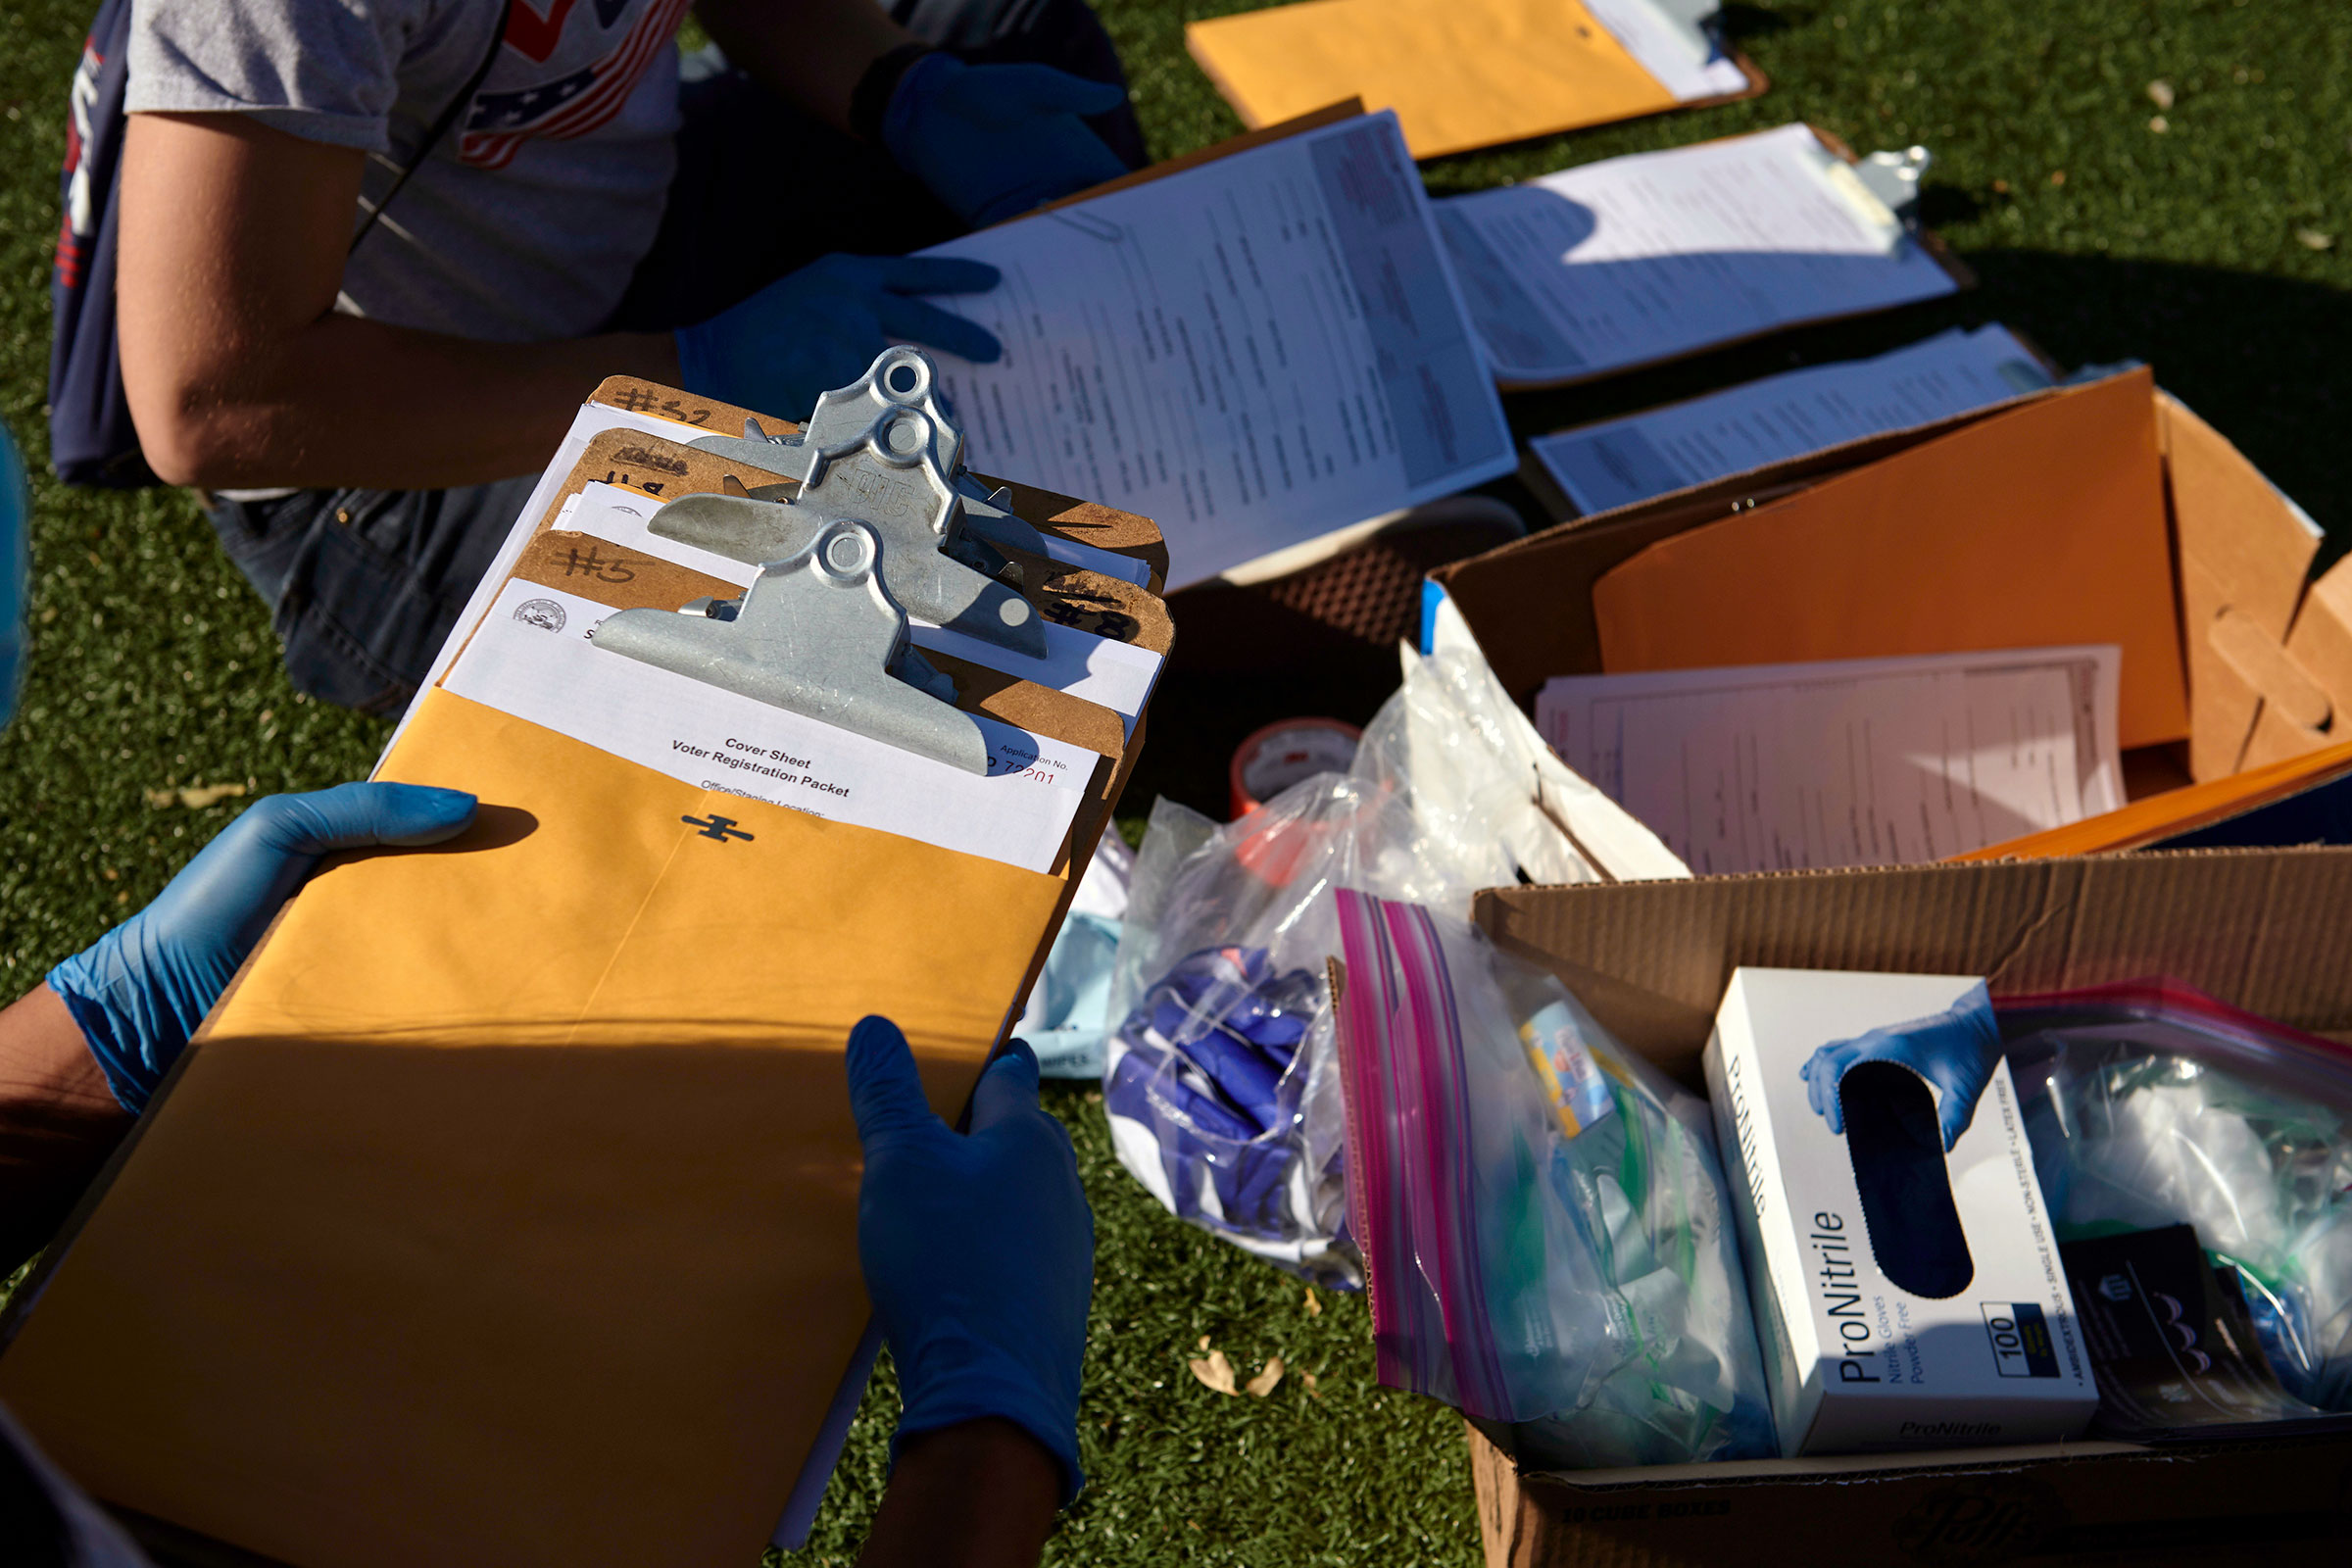 Mi Familia Vota workers organize their voter registration materials and personal protective equipment before canvassing in Las Vegas on Sept. 12, 2020. (Bridget Bennett—The New York Times/Redux)